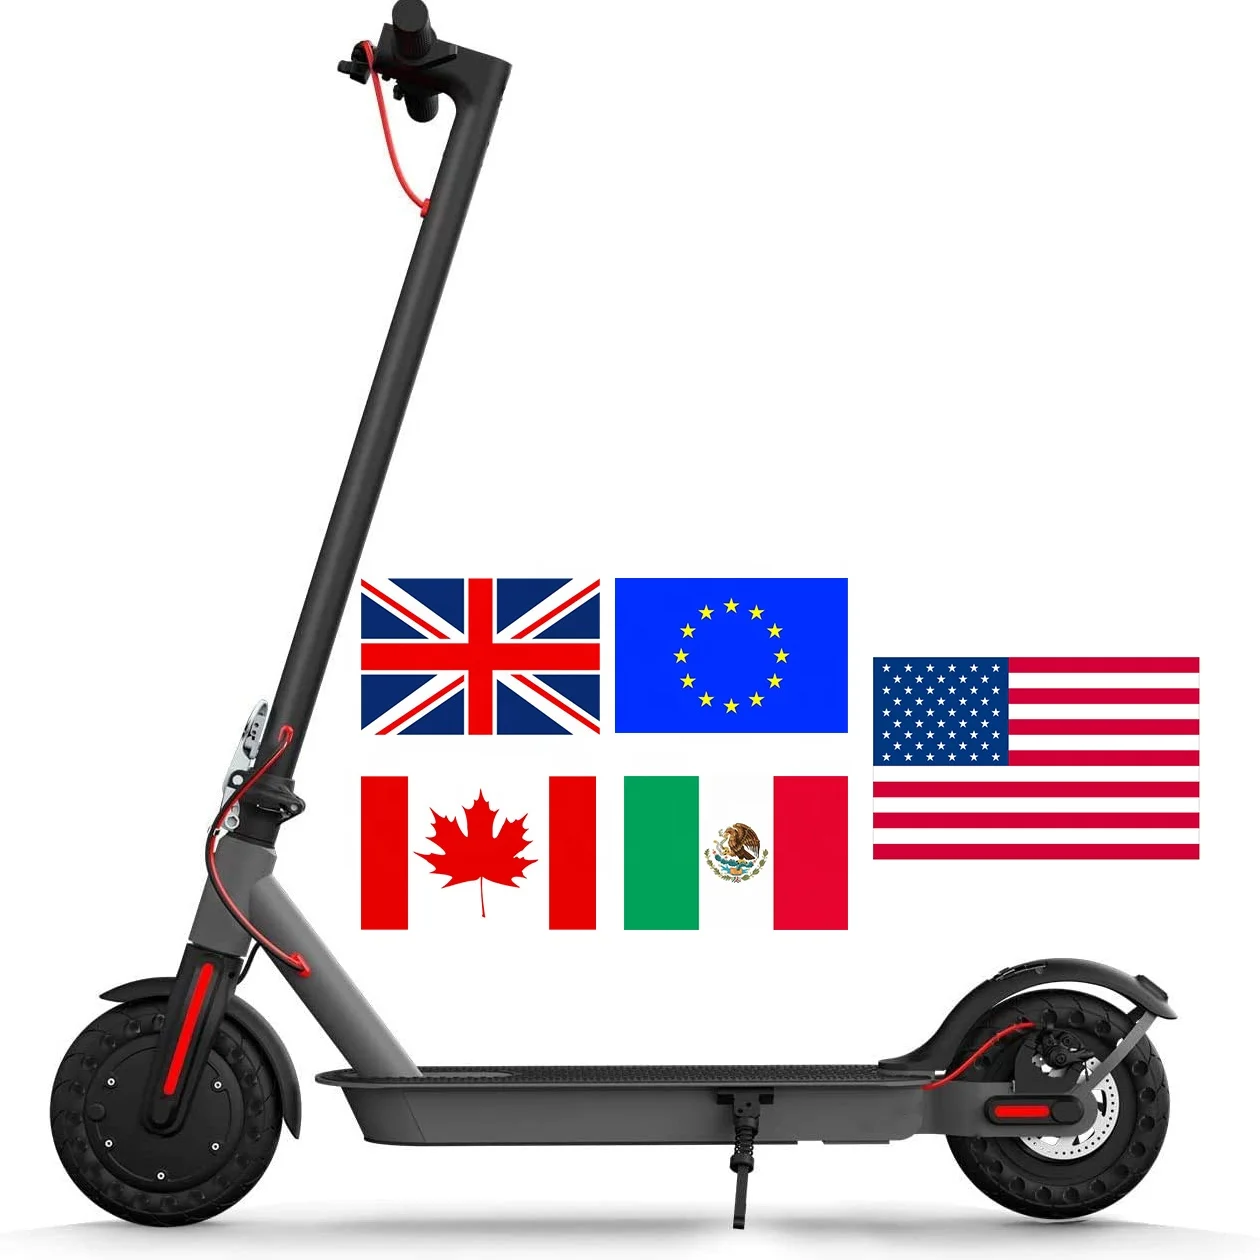 

Oversea Warehouse to EU UK USA Canada Mexico Foldable Electrico E scooter Adult Fast Electric Motorcycle Mobility Mope Scooter